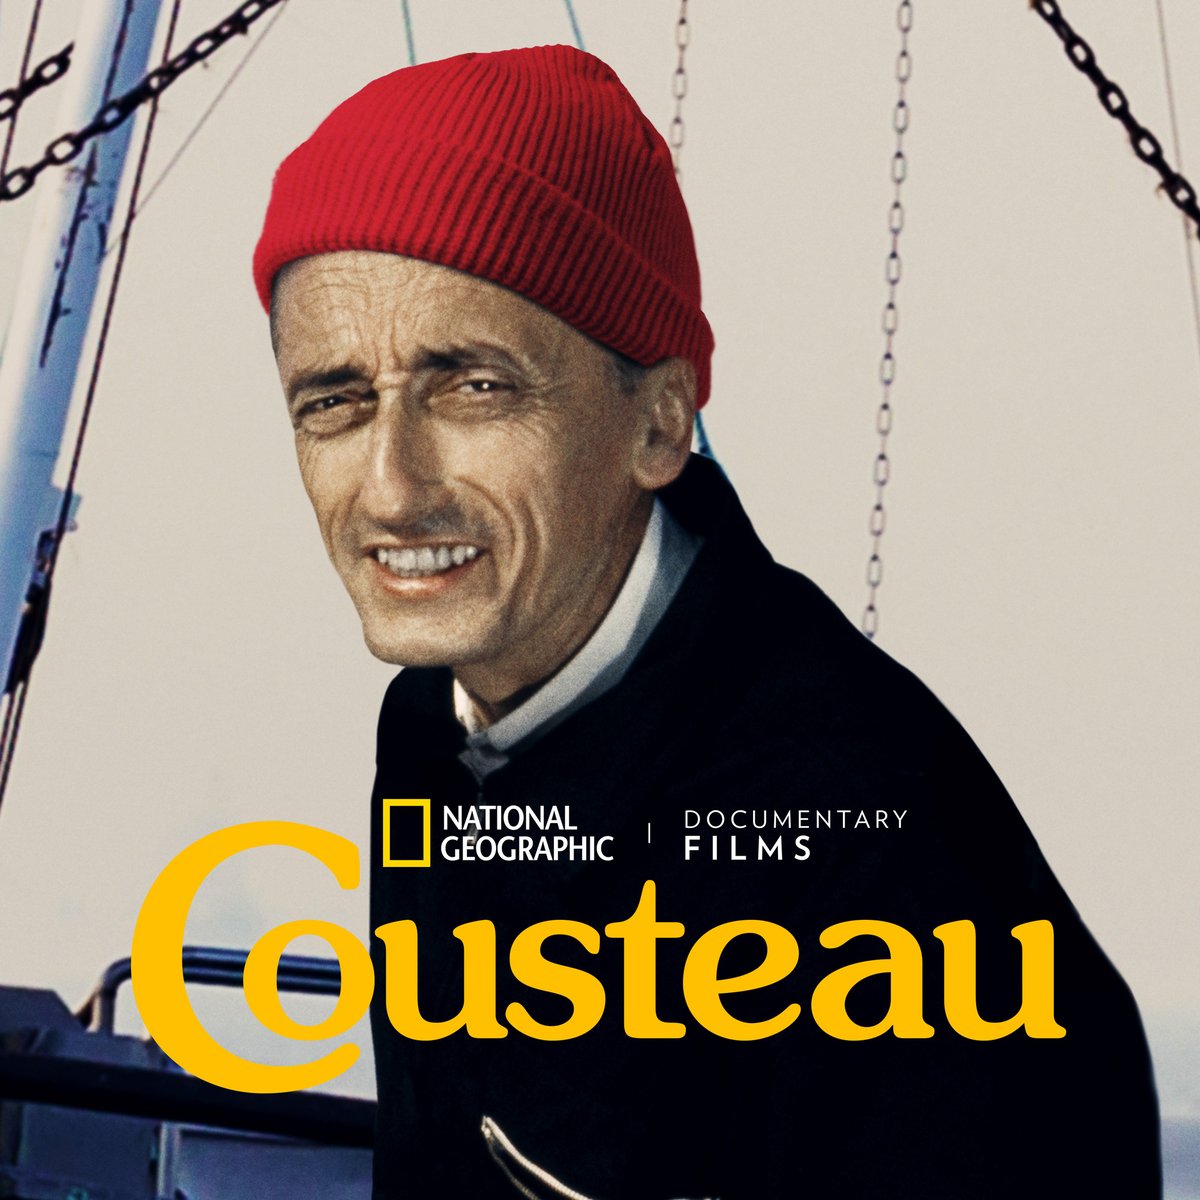 First is the feature documentary Cousteau, being produced by  @NatGeoDocs in partnership with The Cousteau Society, chronicling the life of legendary ocean explorer Jacques Cousteau. 